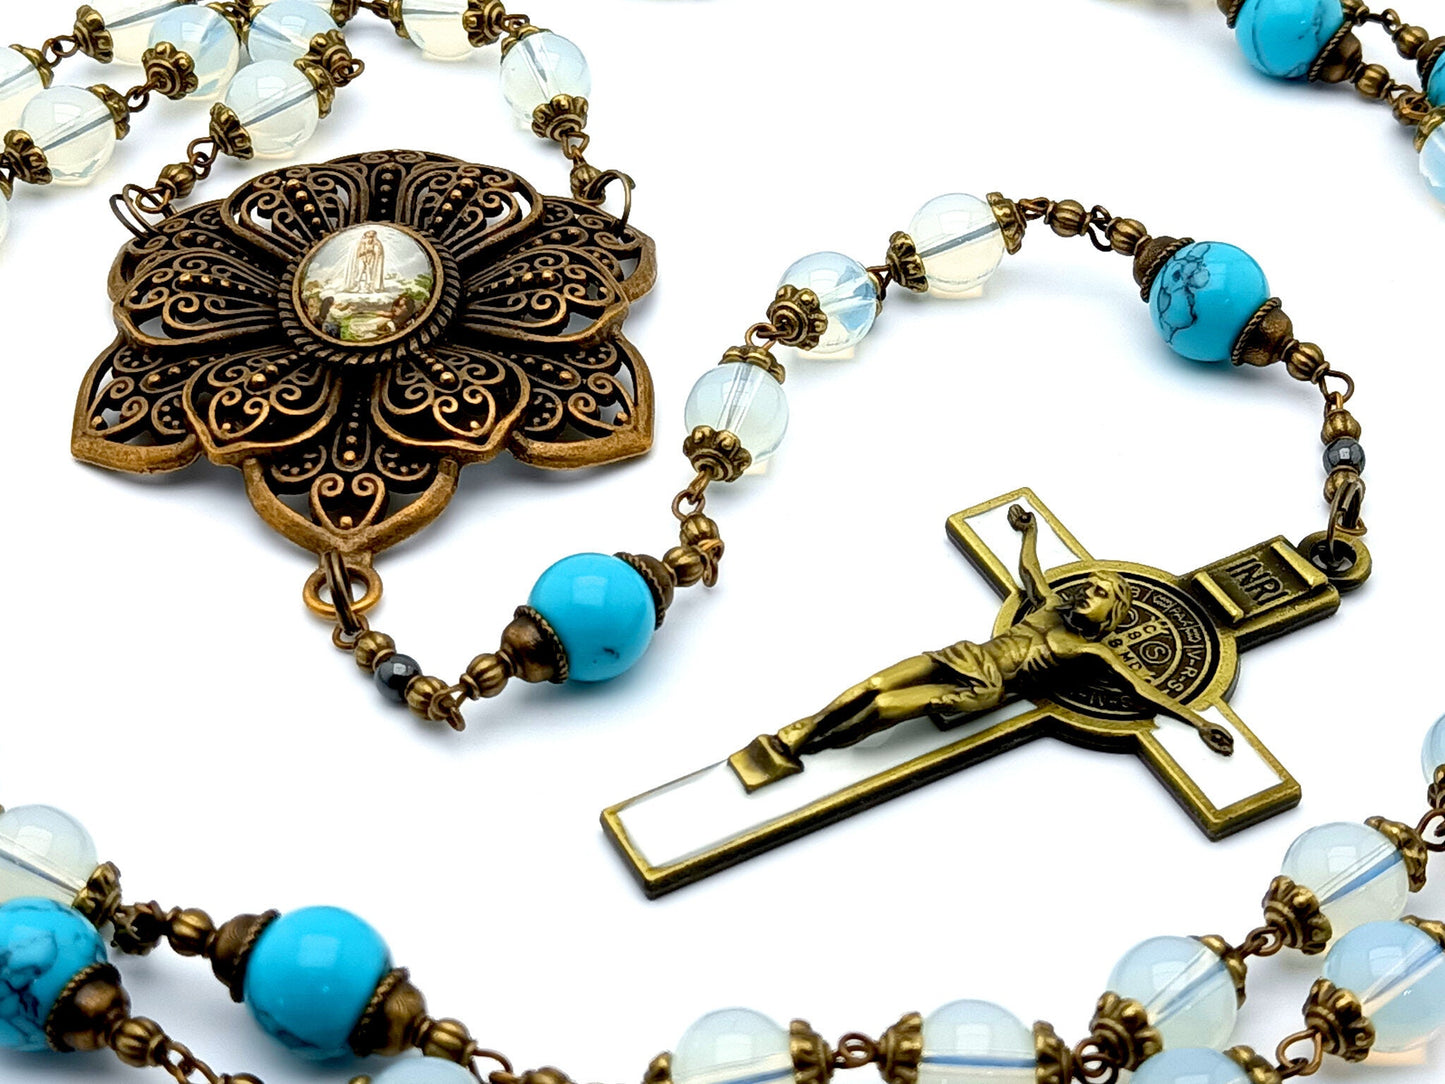 Our Lady of Fatima unique rosary beads with opal and turquoise beads, bronze and white enamel crucifix and large bronze picture centre medal.